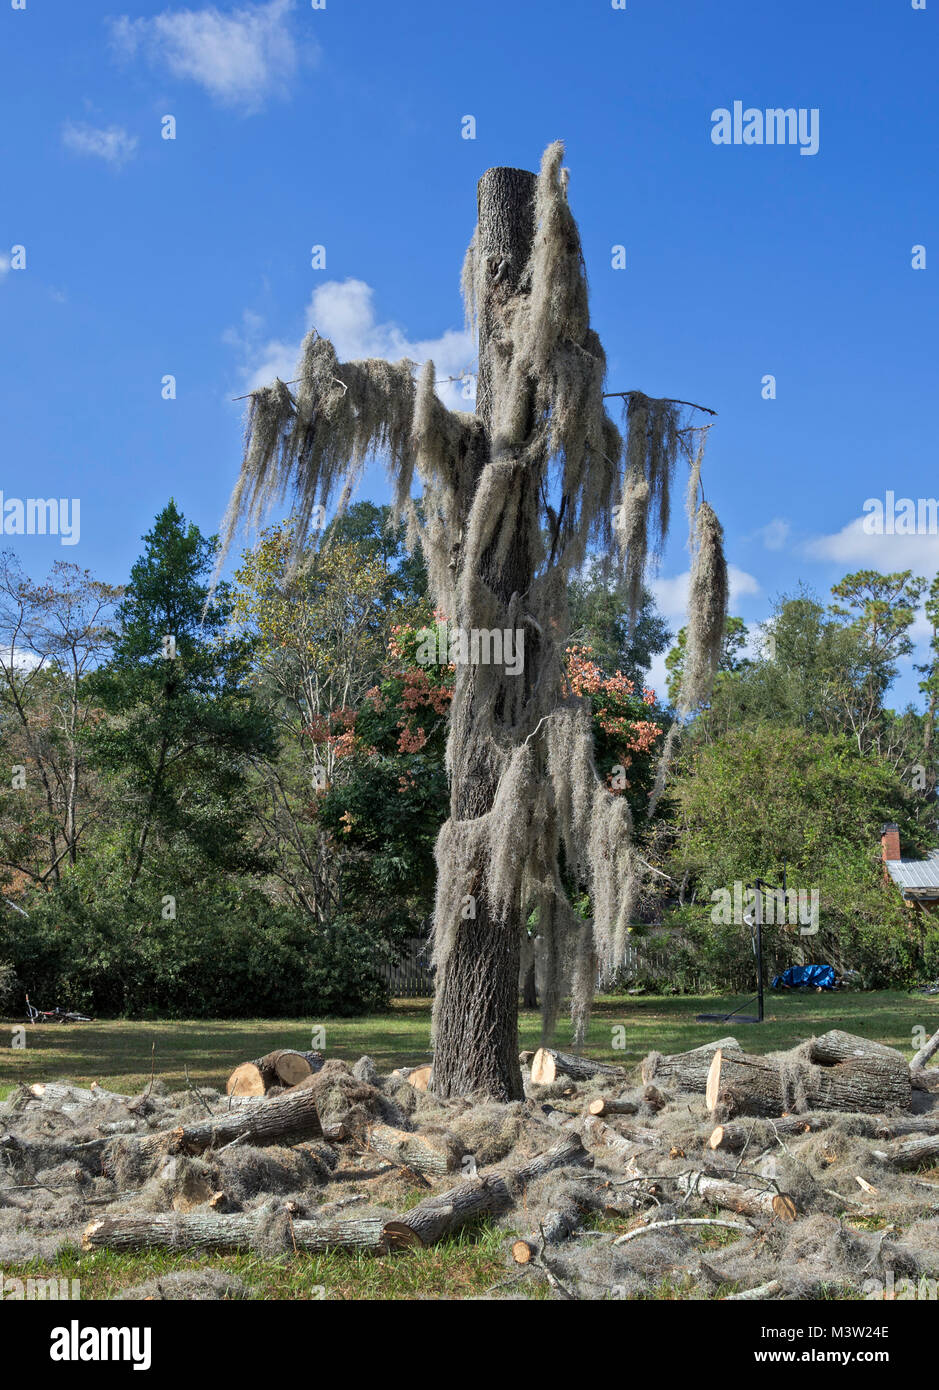 Cutting down a large, moss-covered, old oak tree in North Central Florida. Stock Photo